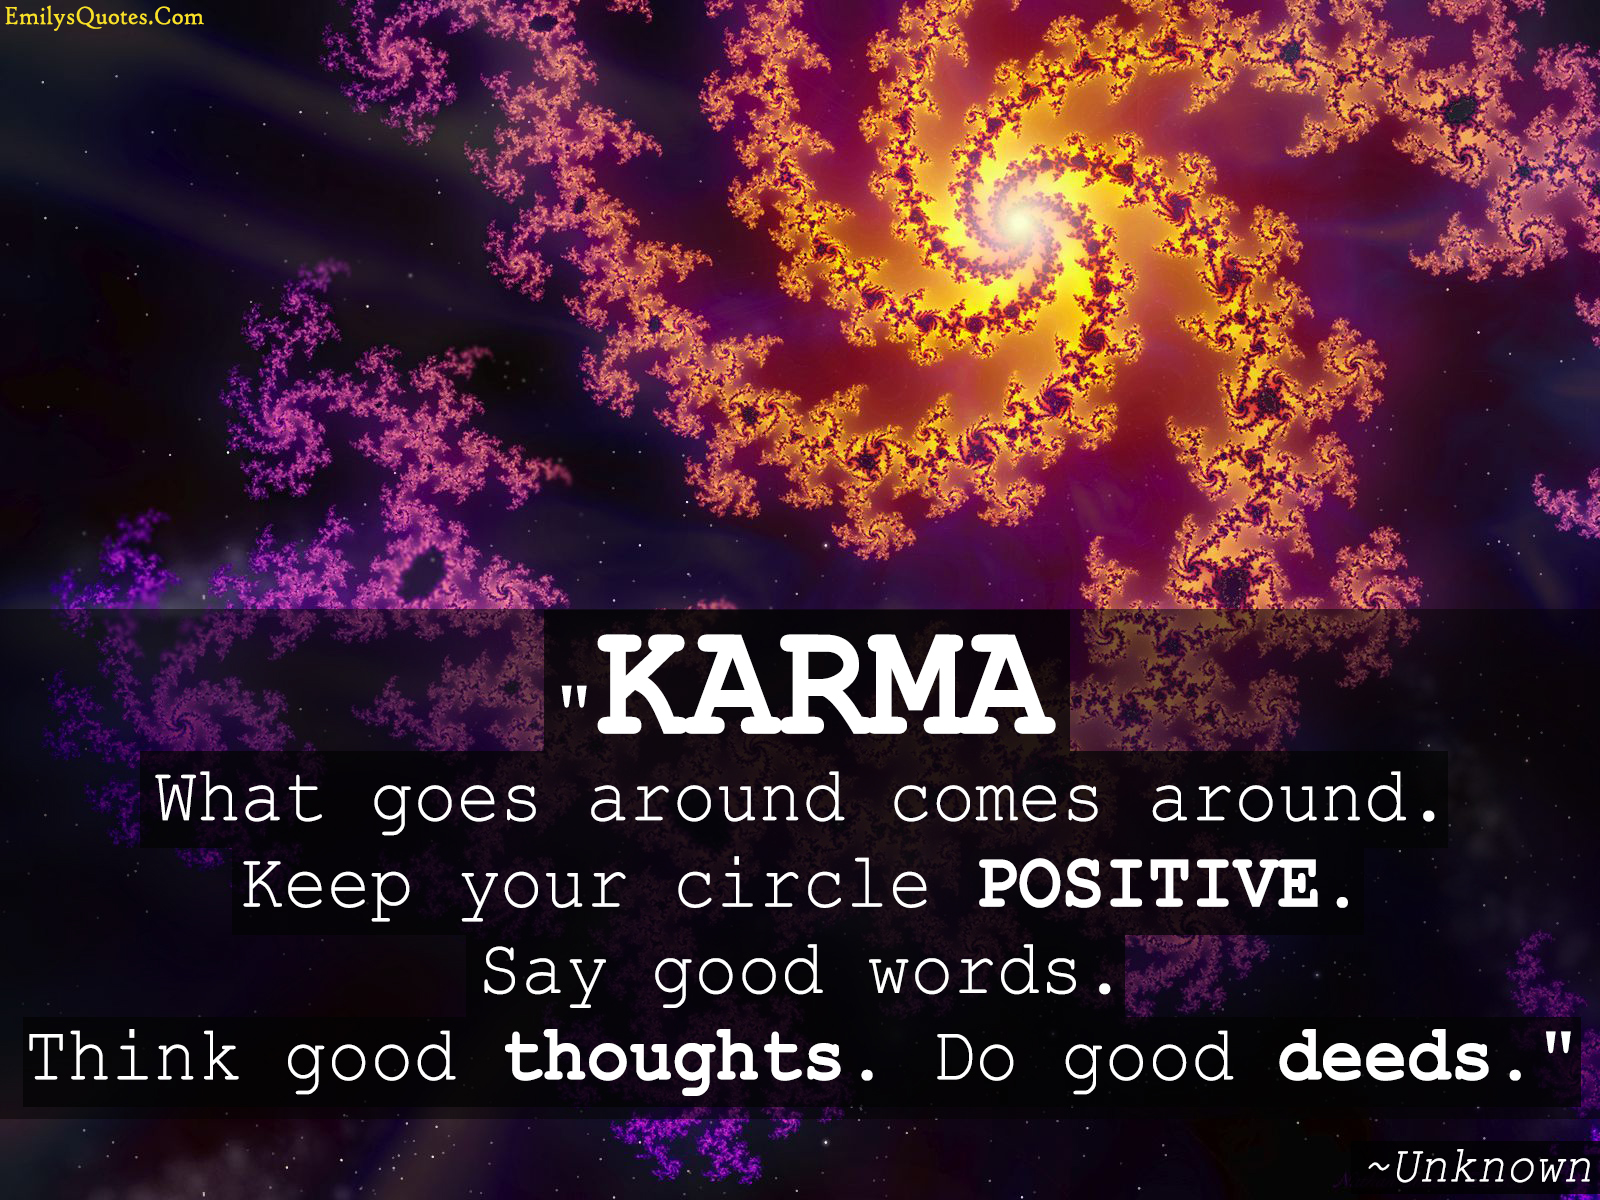 KARMA what goes around comes around keep your circle POSITIVE. Say good words. Think good thoughts. Do good deeds